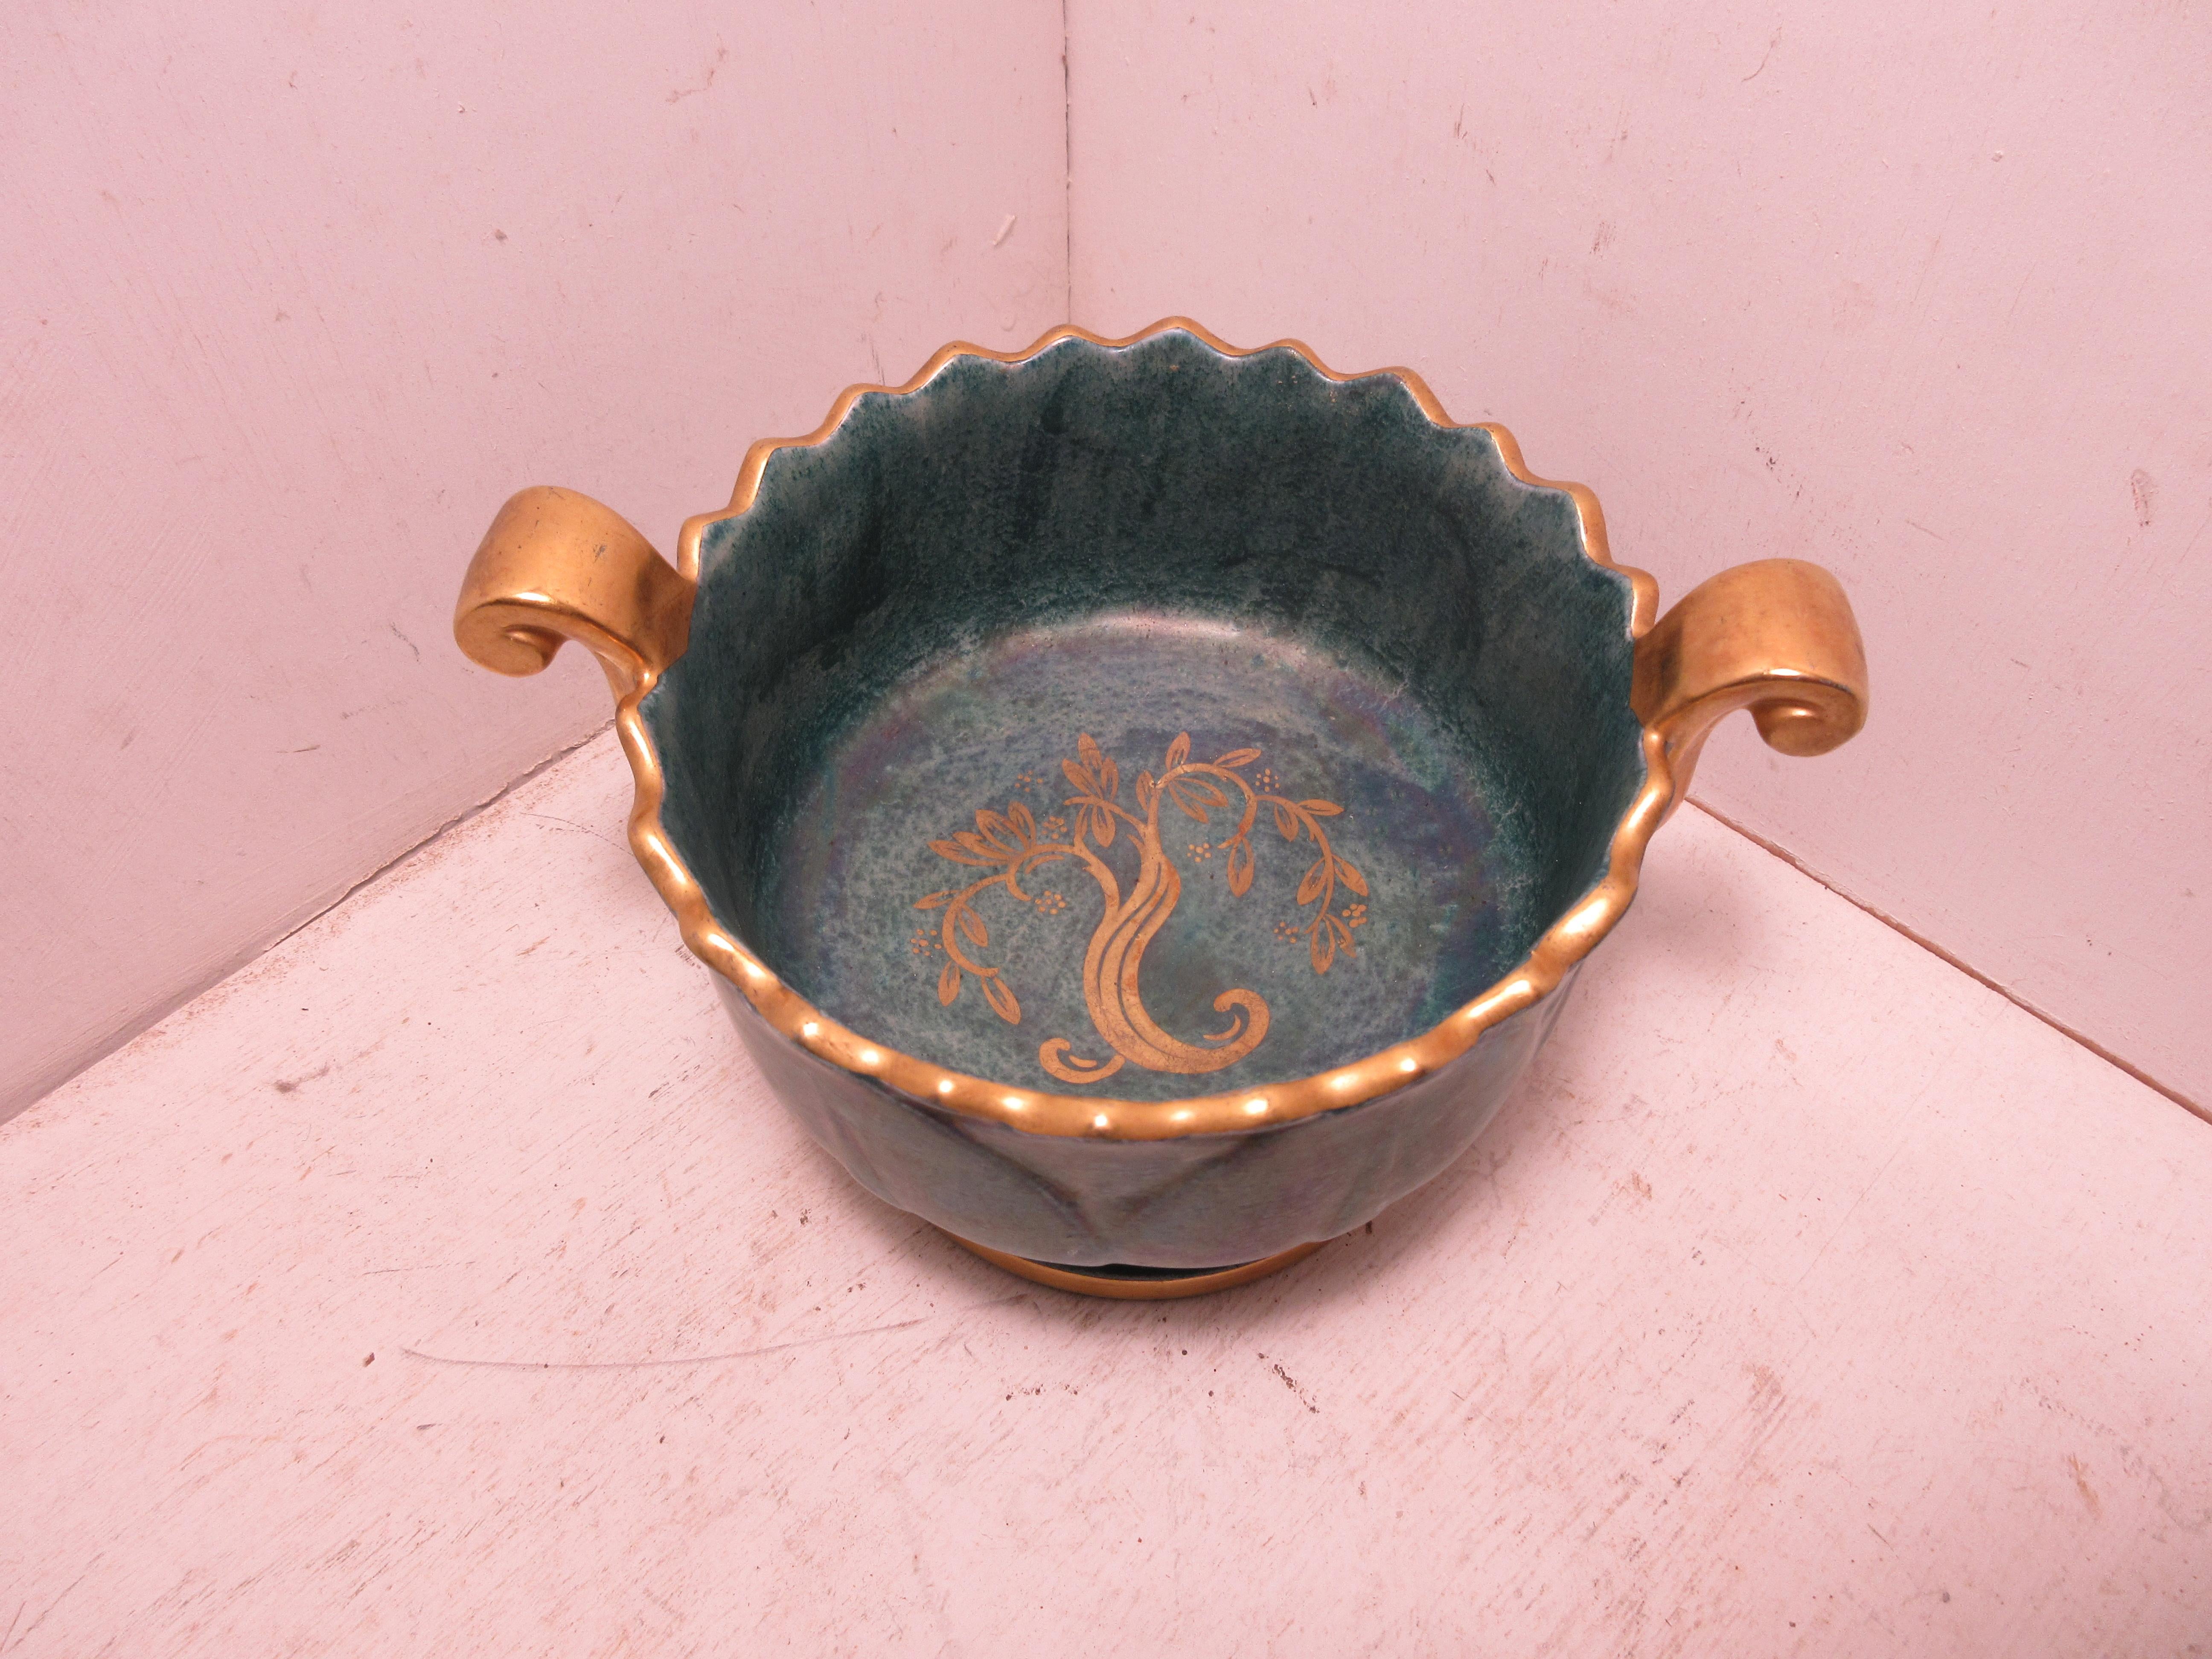 This is a handmade rare Swedish Art Deco ceramic bowl in green and gold luster glaze hand decorated with gold made by the Swedish ceramic artist Josef Ekberg. He was one of Sweden’s top Ceramic artist at the time. He started working at the